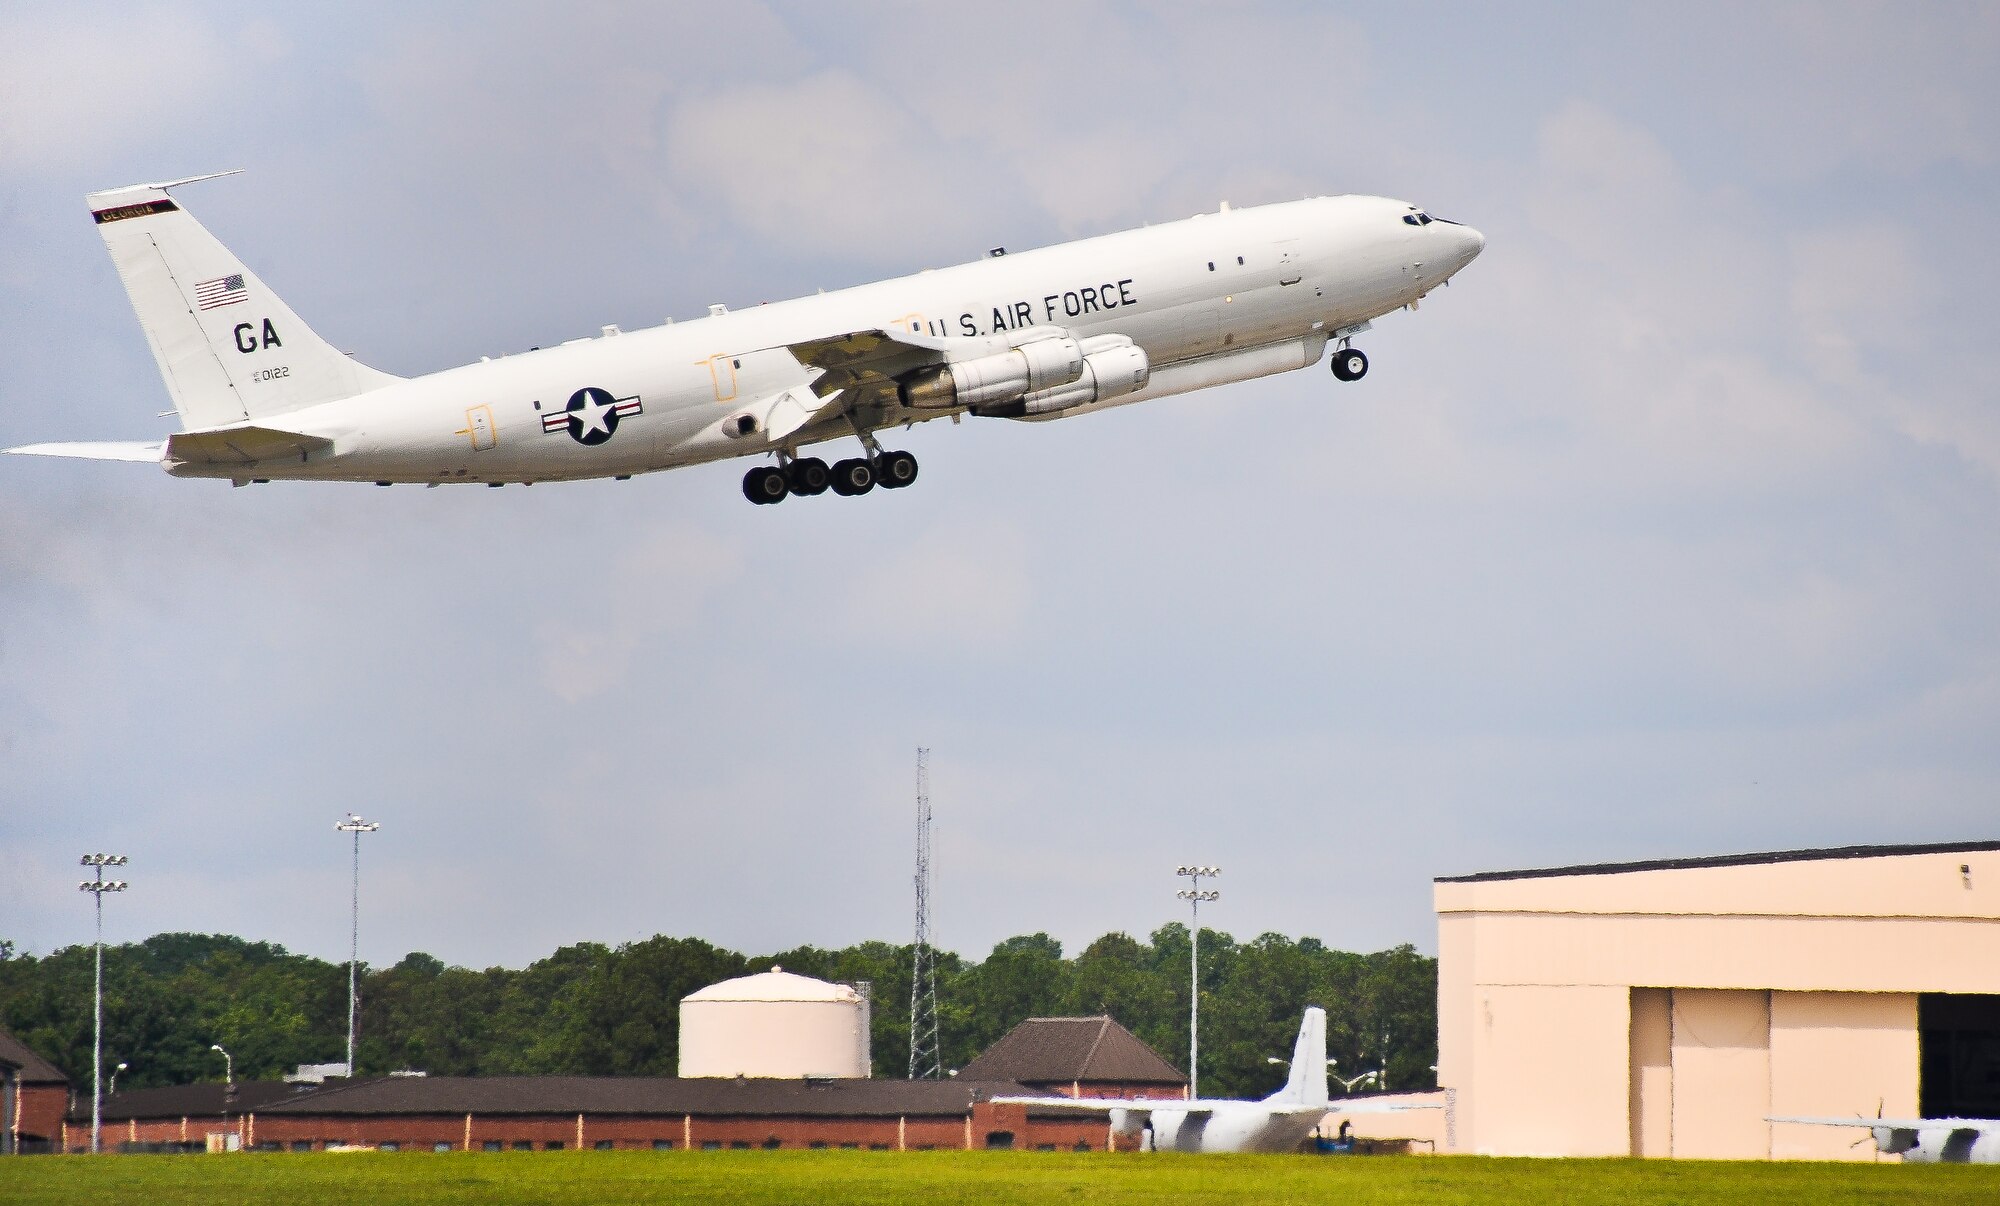 An E-8C Joint STARS takes off for a mission in support of Exercise Iron Dagger at Robins Air Force Base, Ga., June 14, 2012.  Team Joint STARS created the first ever Iron Dagger exercise which involved more than $1 billion worth of joint service assets from four different states and included Air Force, National Guard, Army, Navy and U.S. Customs and Border Protection personnel and equipment. (National Guard photo by Master Sgt. Roger Parsons/Released)  